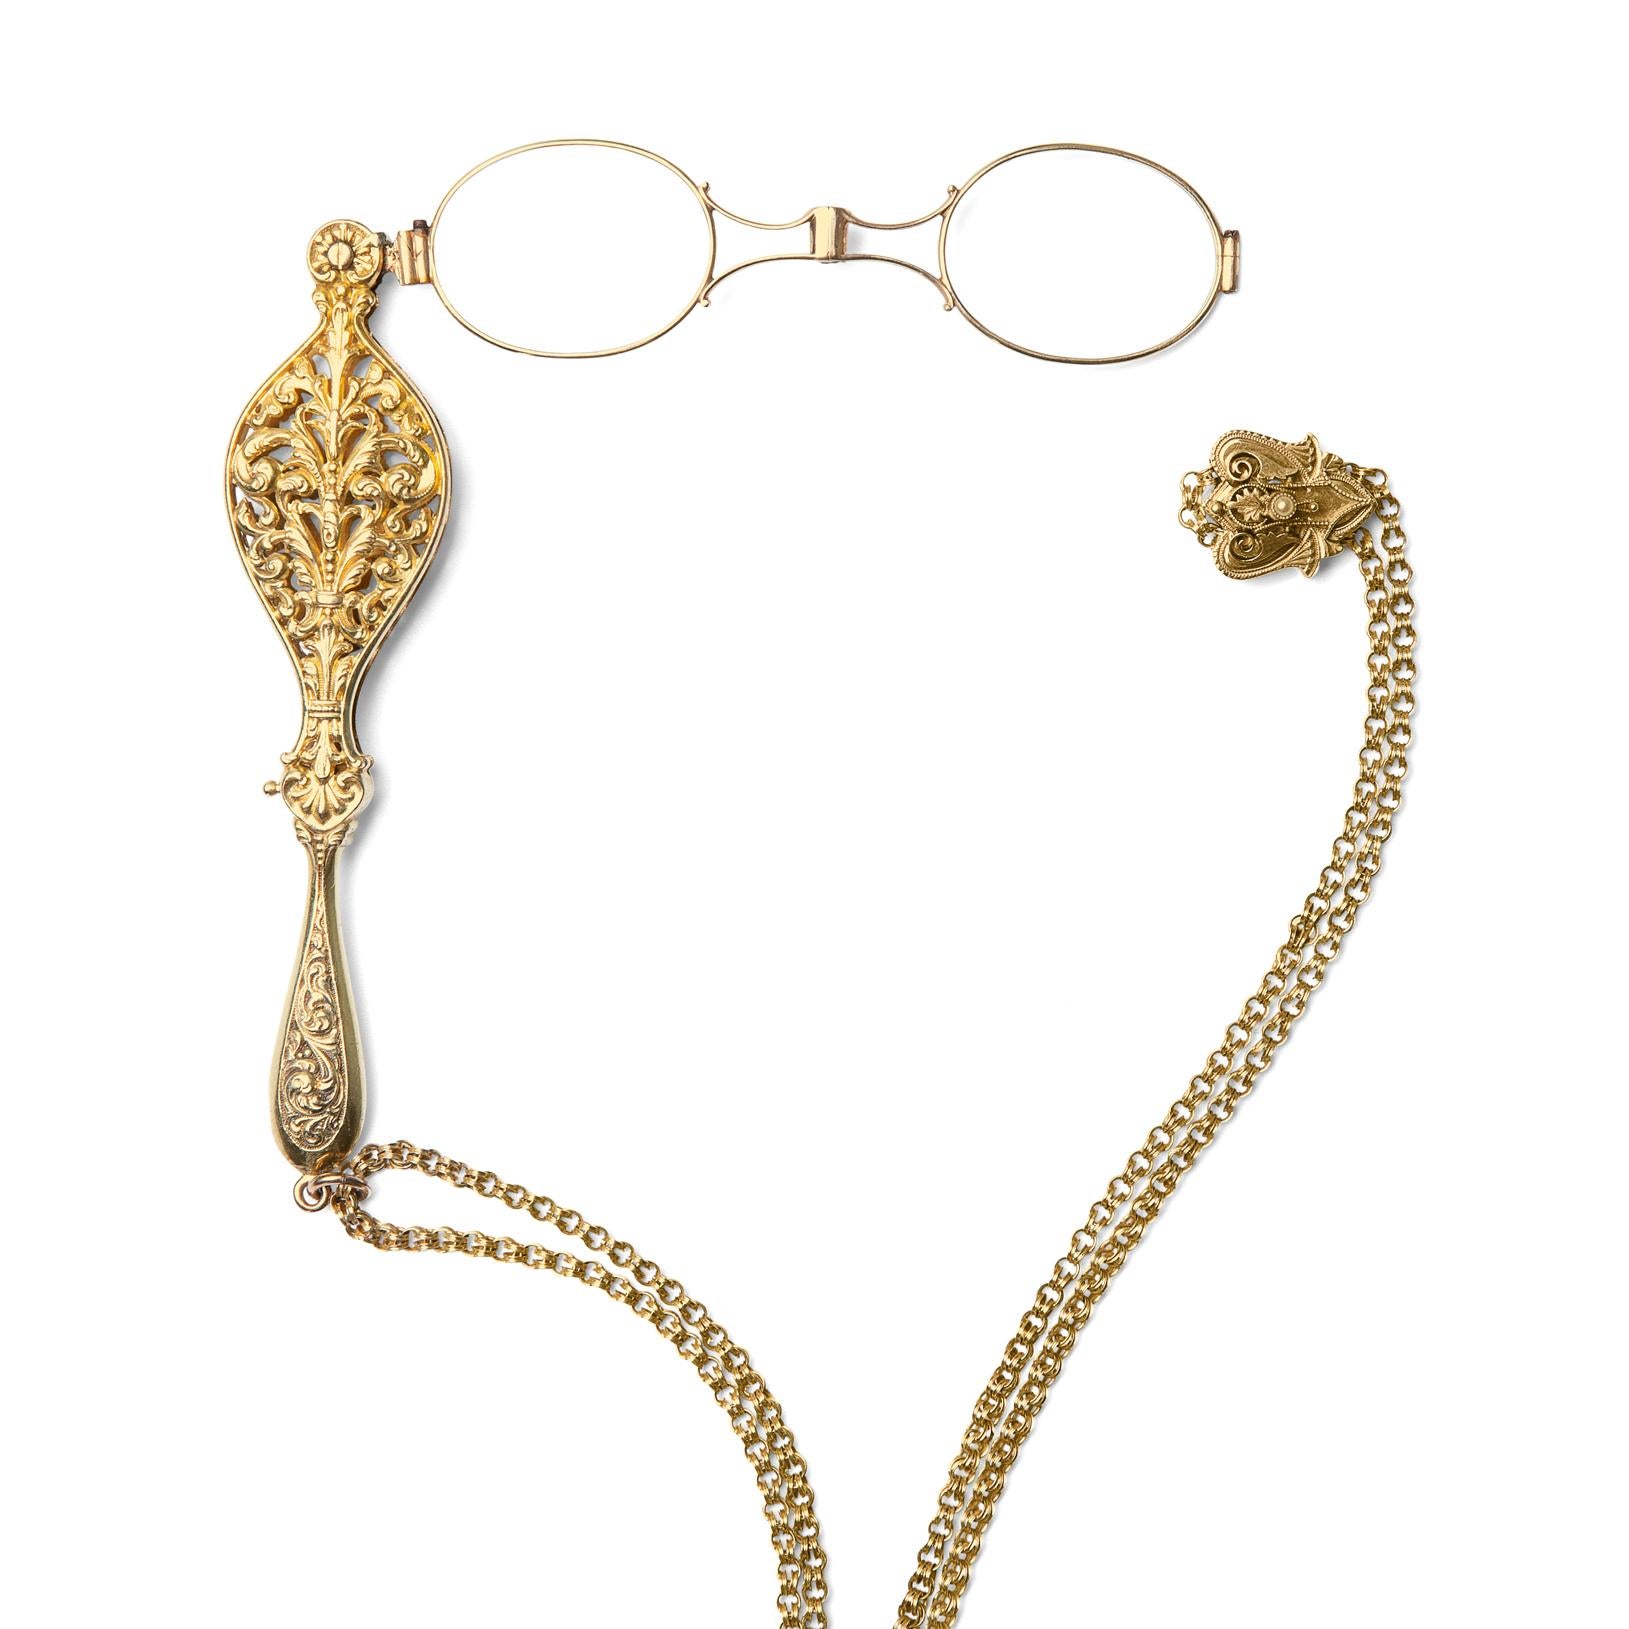 Collectable and beautiful, this antique Victorian 14k lorgnette is crafted with pierced, ornate scrolling designs, suspended from a handmade round link long chain, with a slide set with a half-pearl. In phenomenal condition, the necklace weighs 57